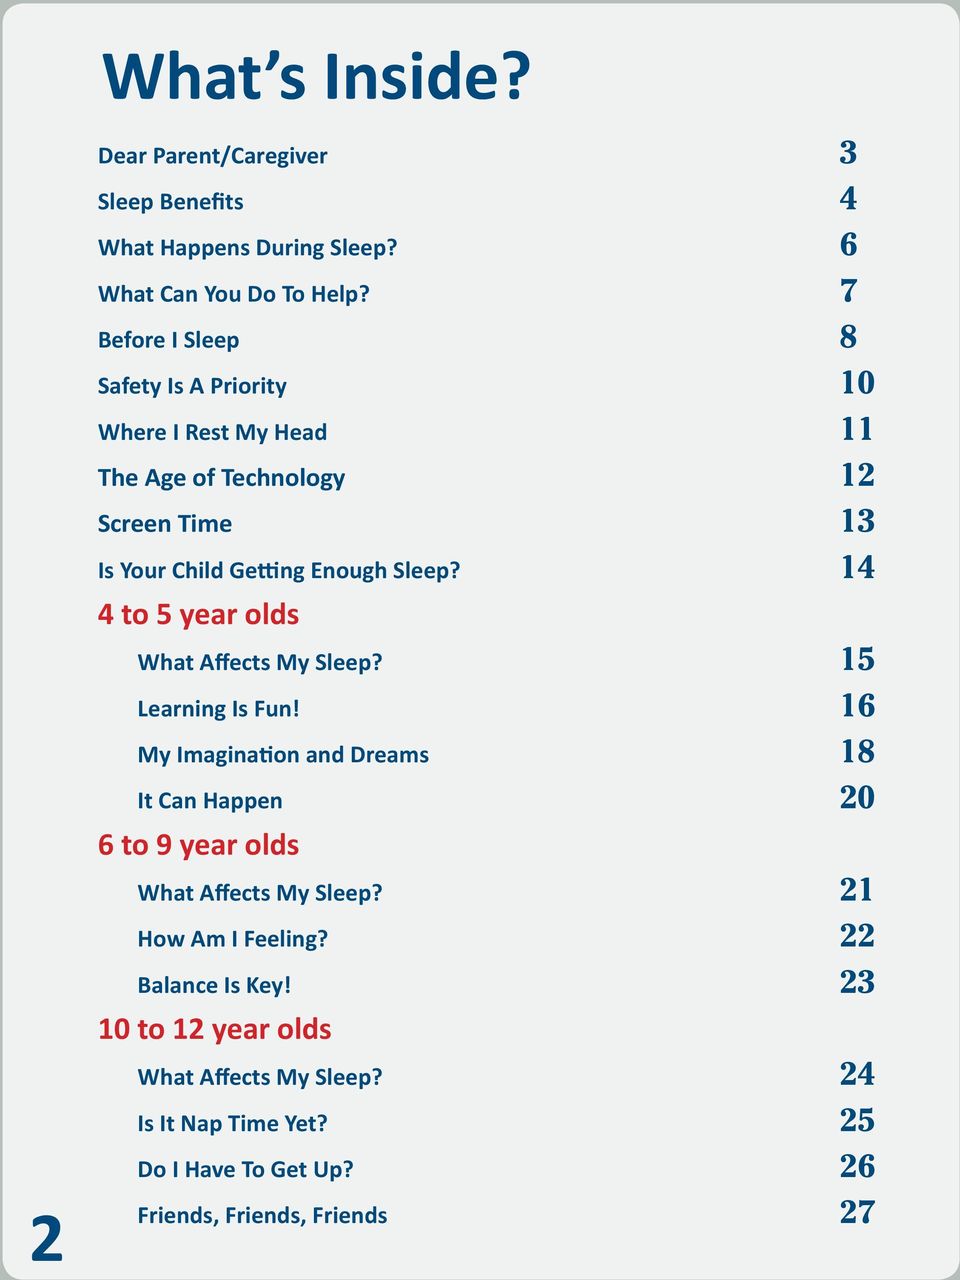 14 4 to 5 year olds What Affects My Sleep? 15 Learning Is Fun!